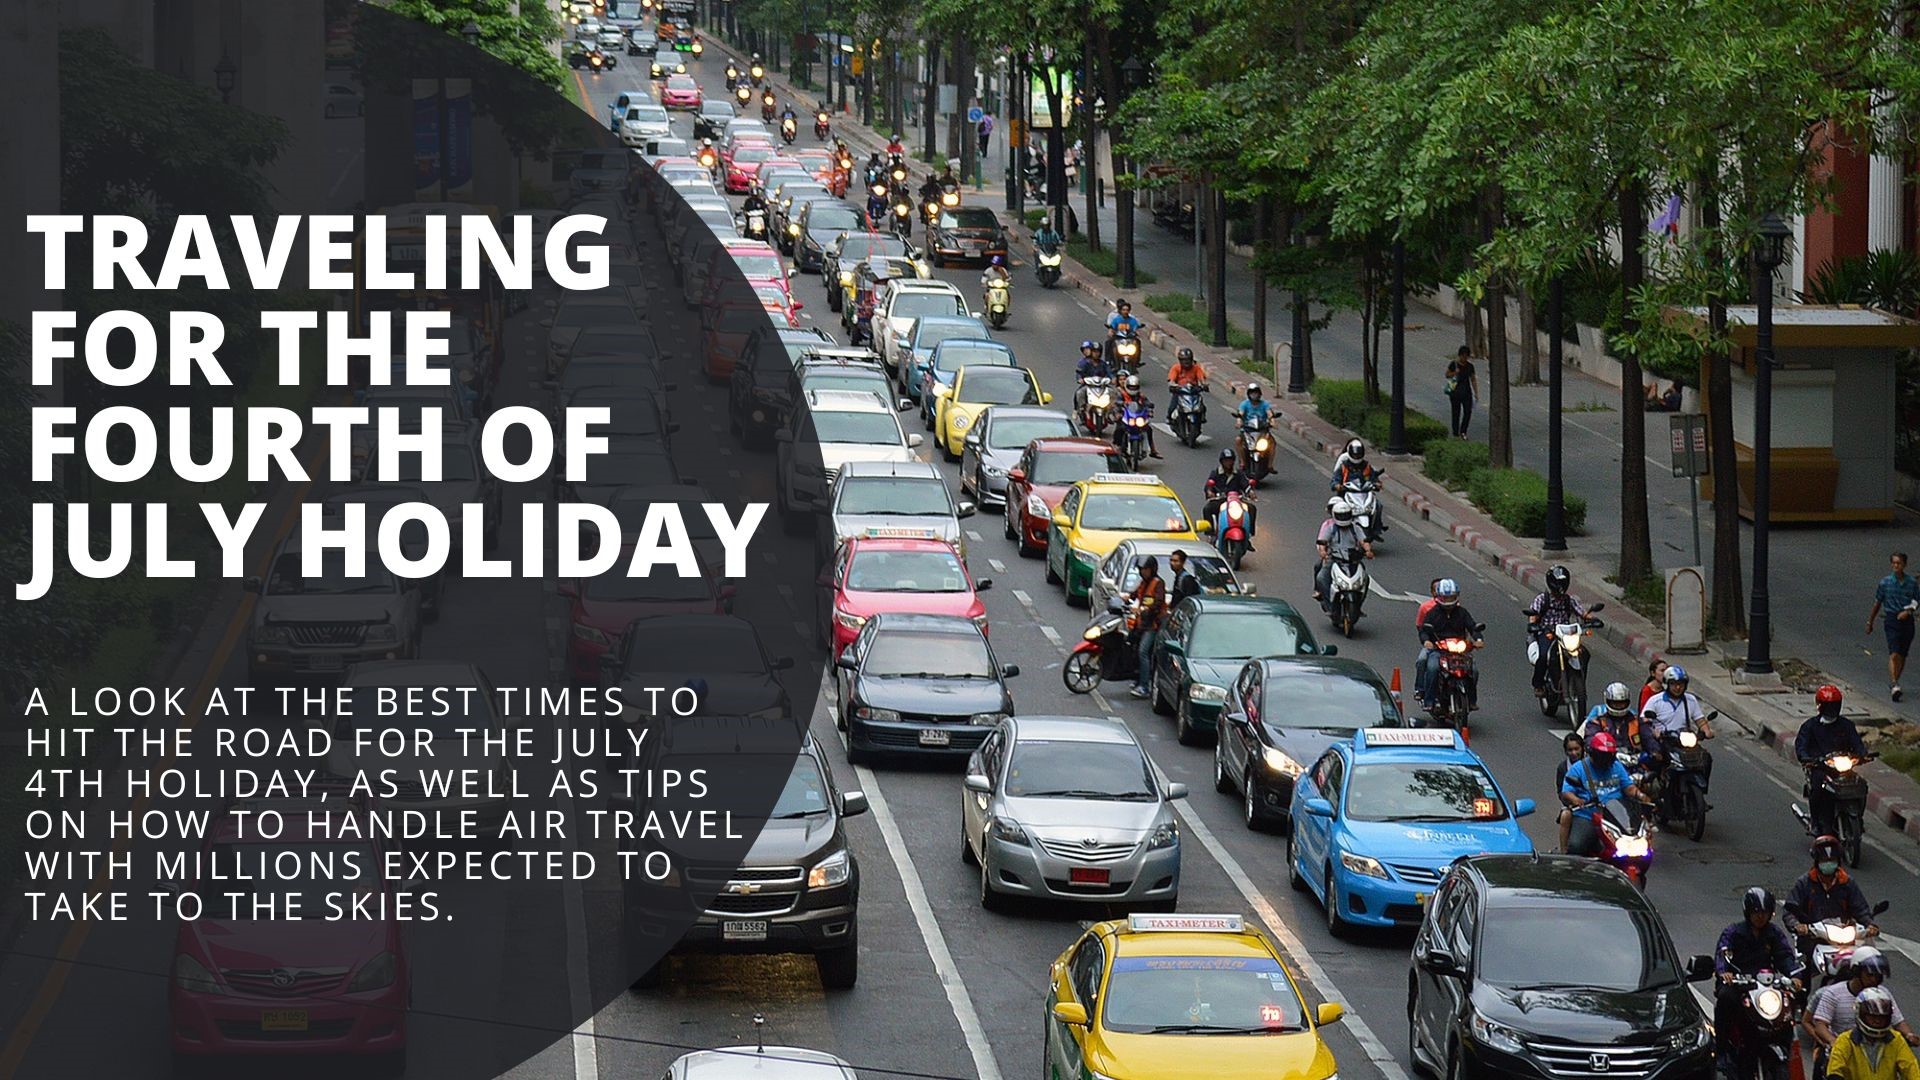 A look at the best times to hit the road for the July 4th holiday, as well as tips on how to handle air travel with millions expected to take to the skies.